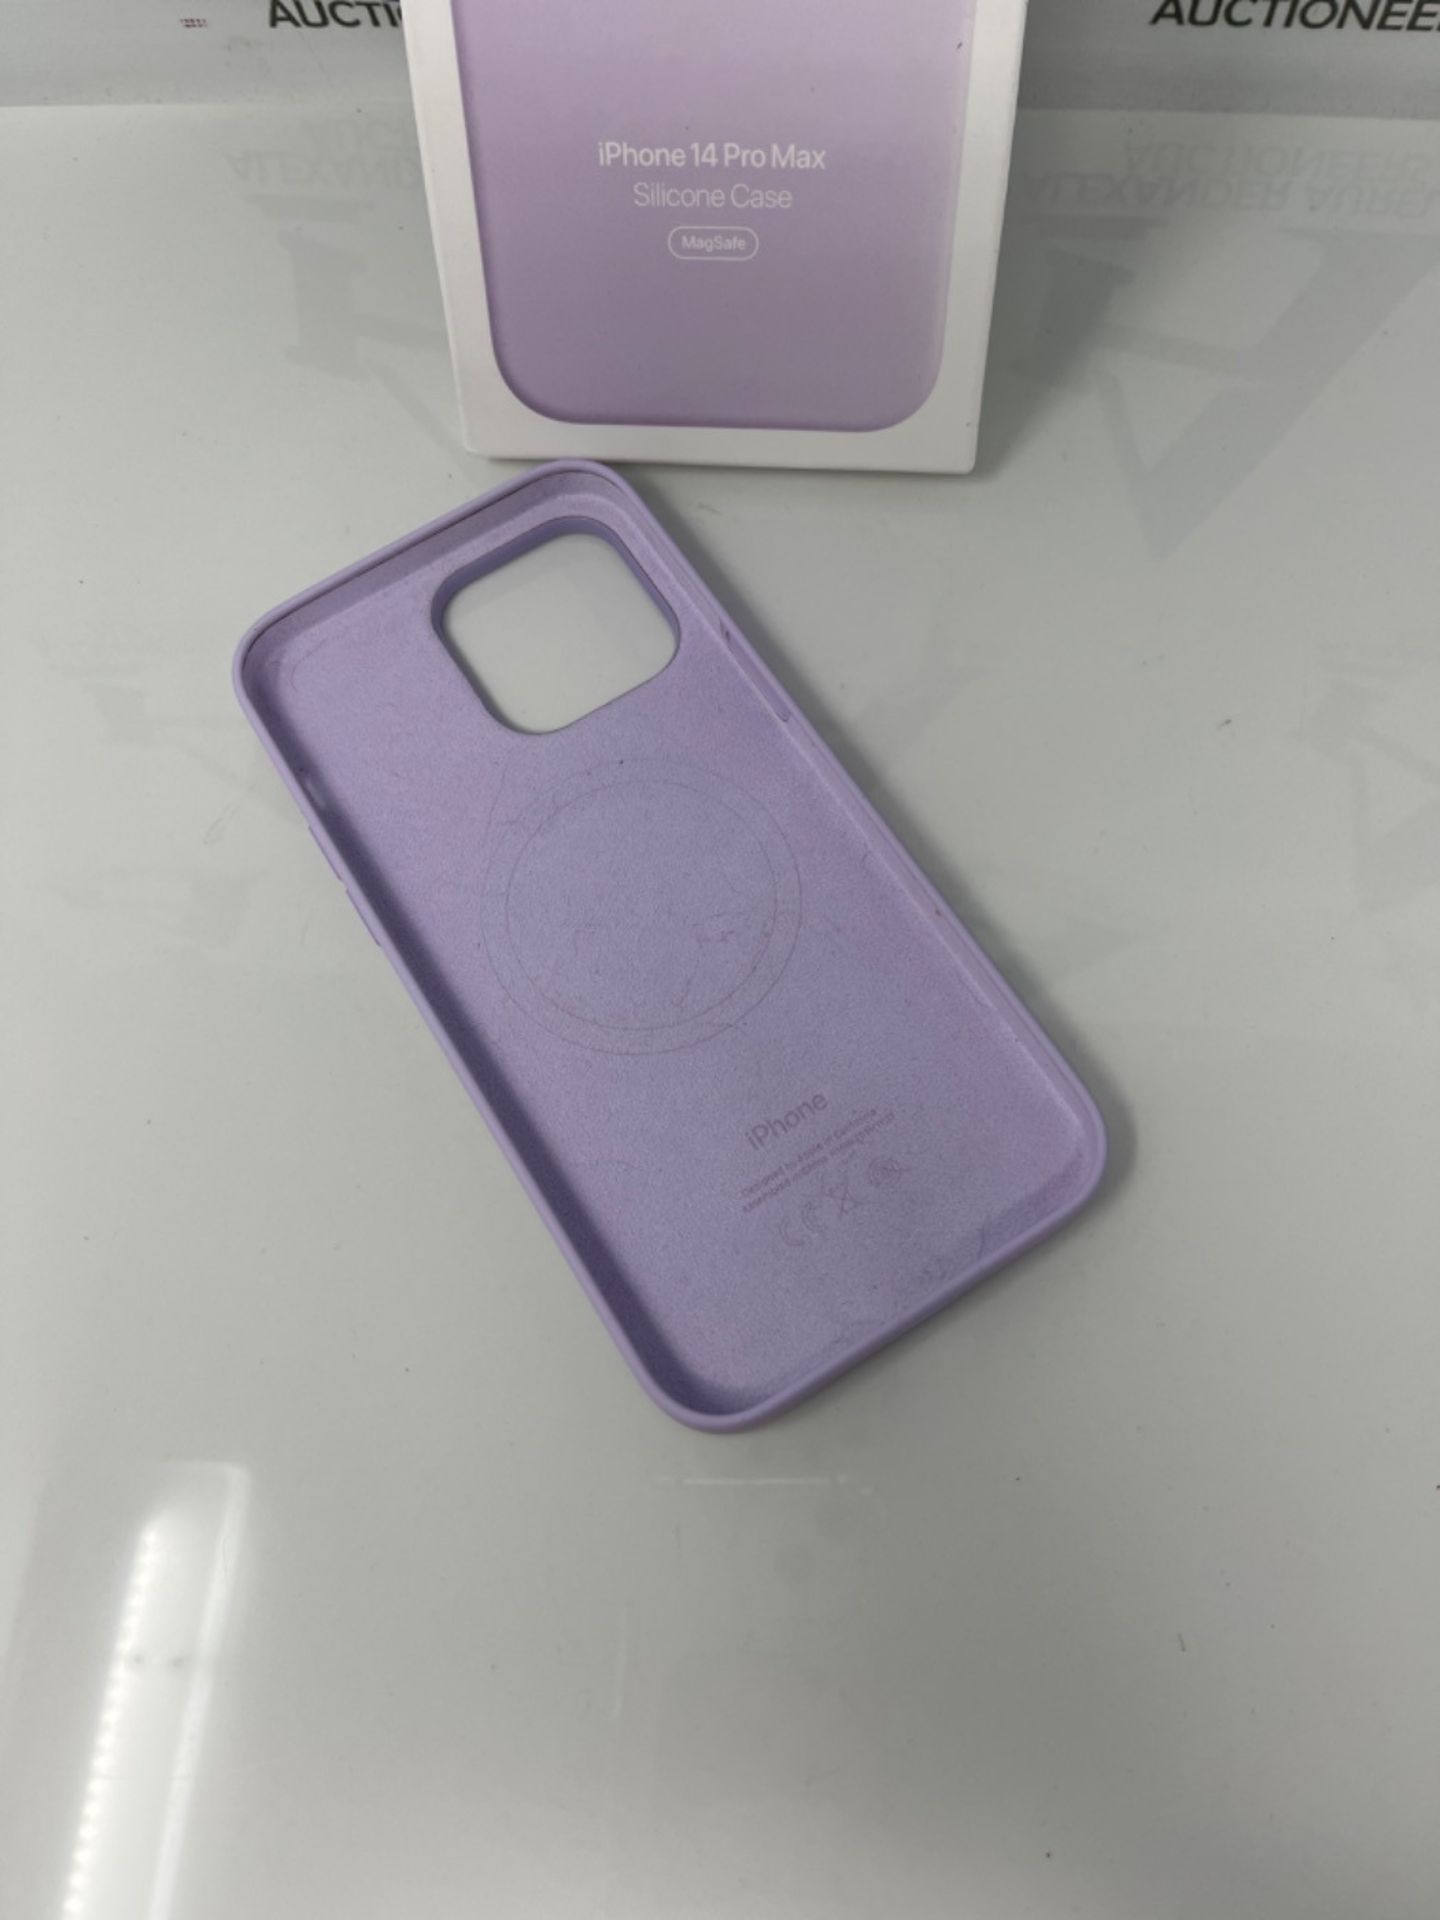 Apple iPhone 14 Pro Max Silicone Case with MagSafe - Lilac â¬ 9 â¬ 9 â¬ 9 â? - Image 3 of 3